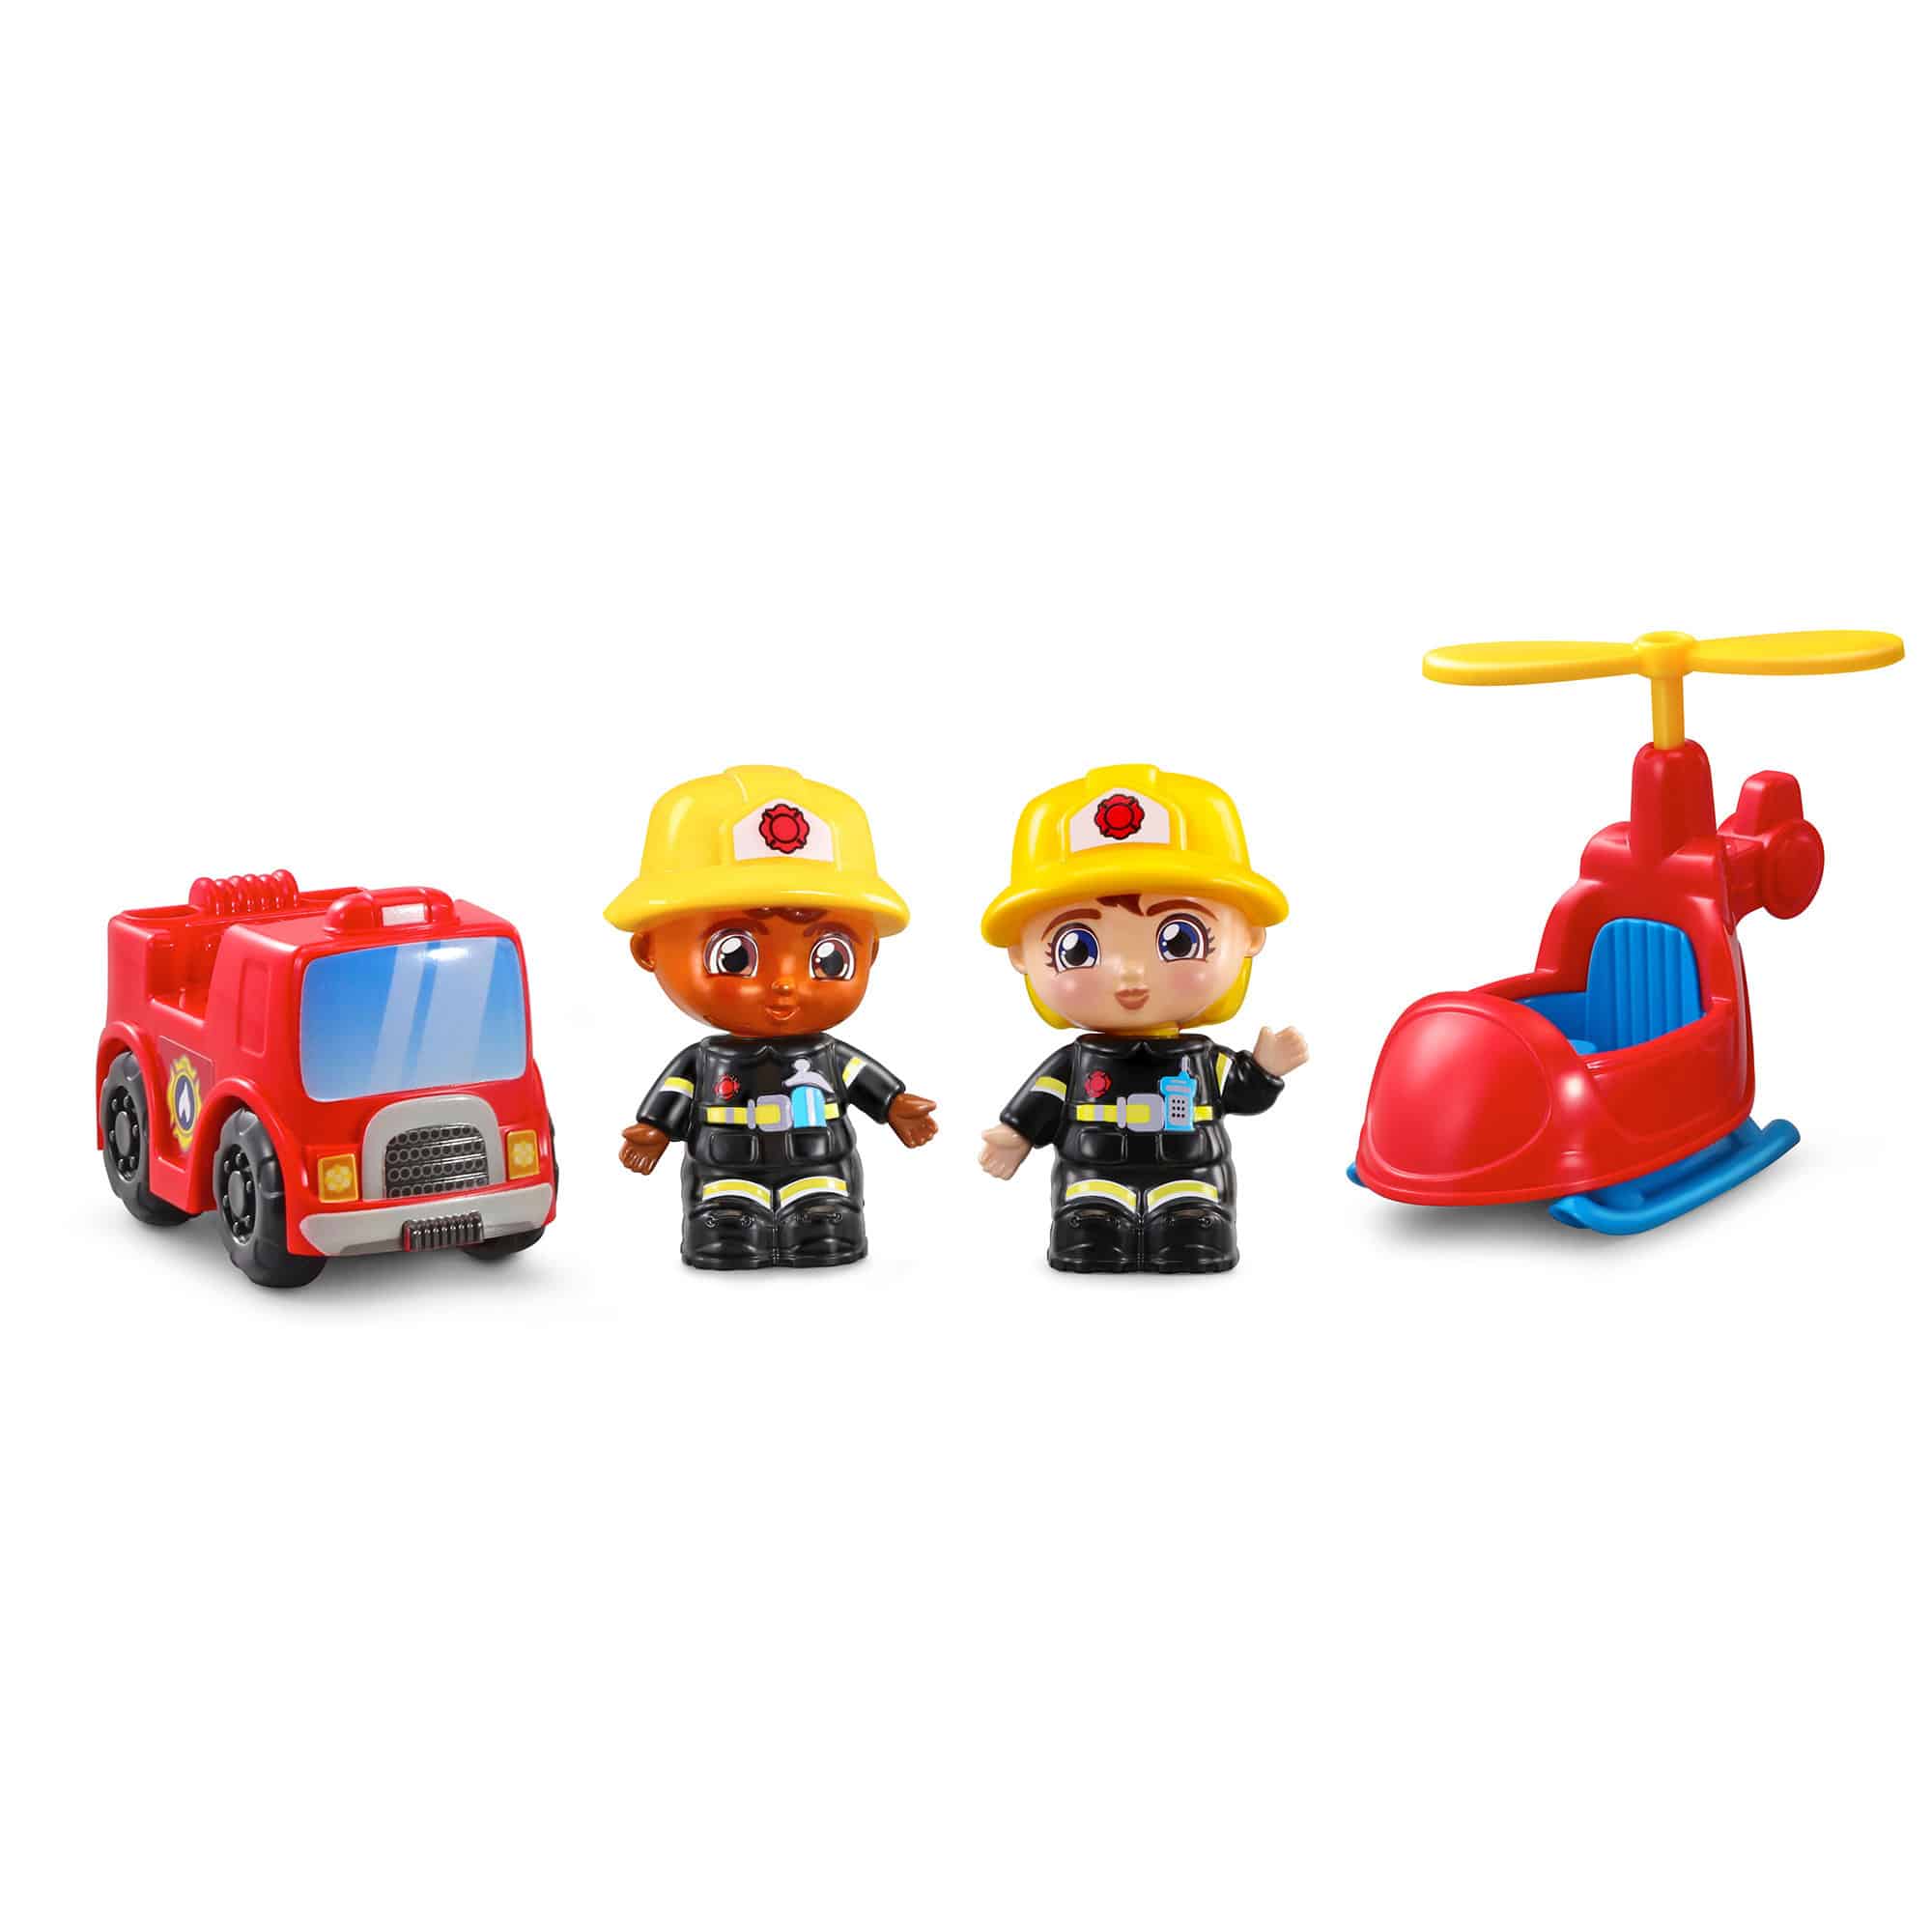 Vtech - Toot Toot Friends - 2-in-1 Fire Station